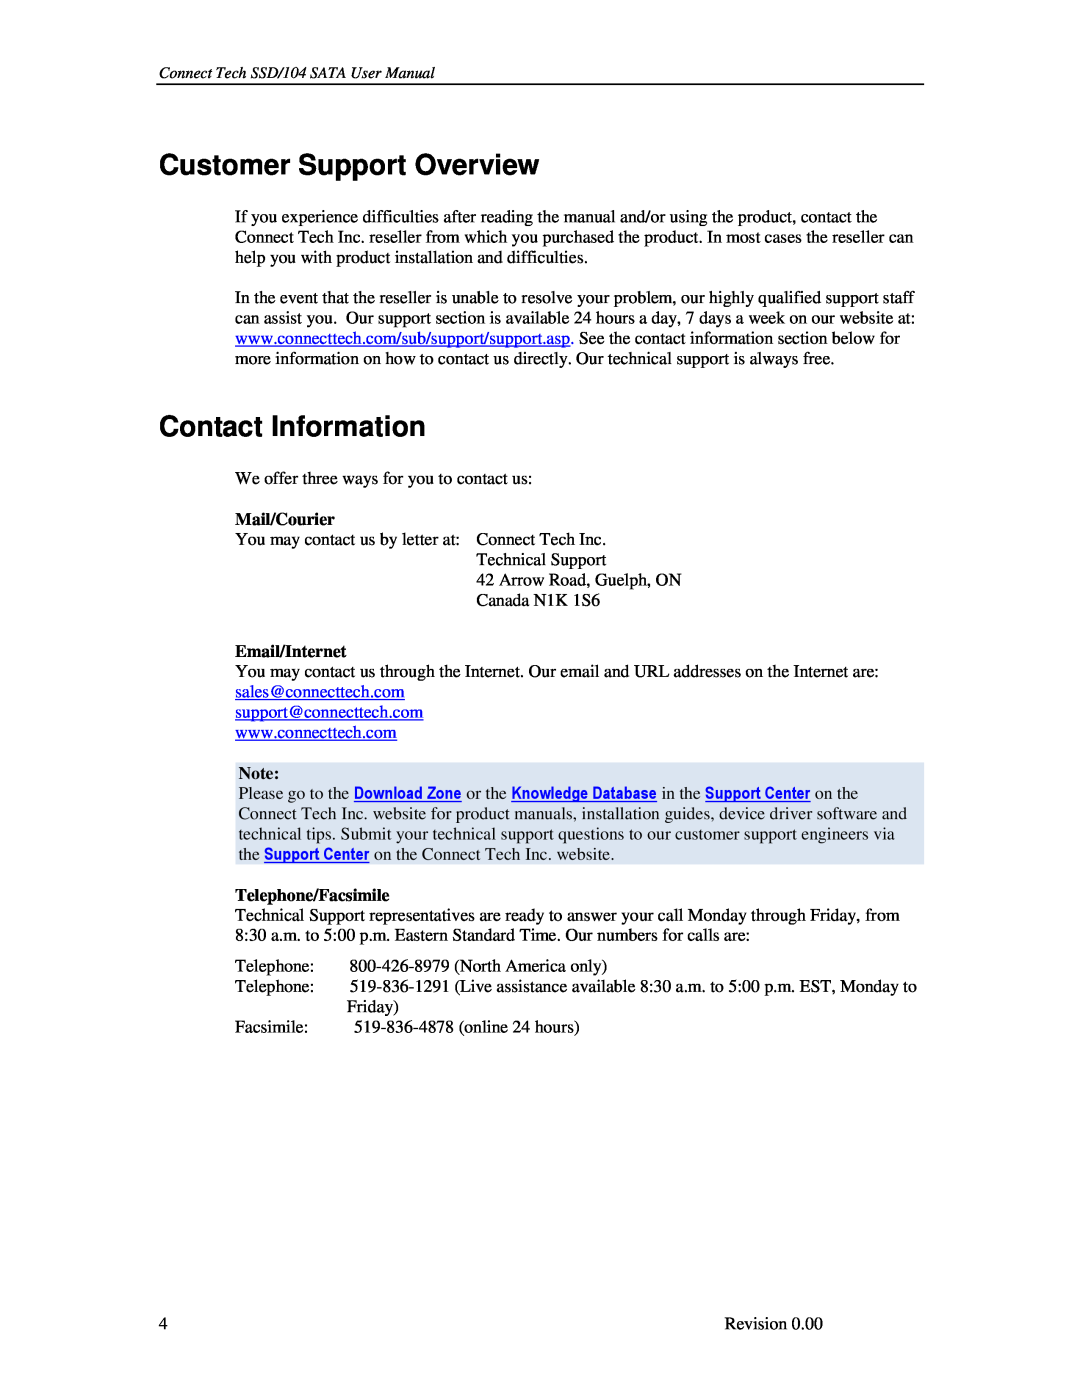 Connect Tech SSD/104 Customer Support Overview, Contact Information, Mail/Courier, Email/Internet, Telephone/Facsimile 